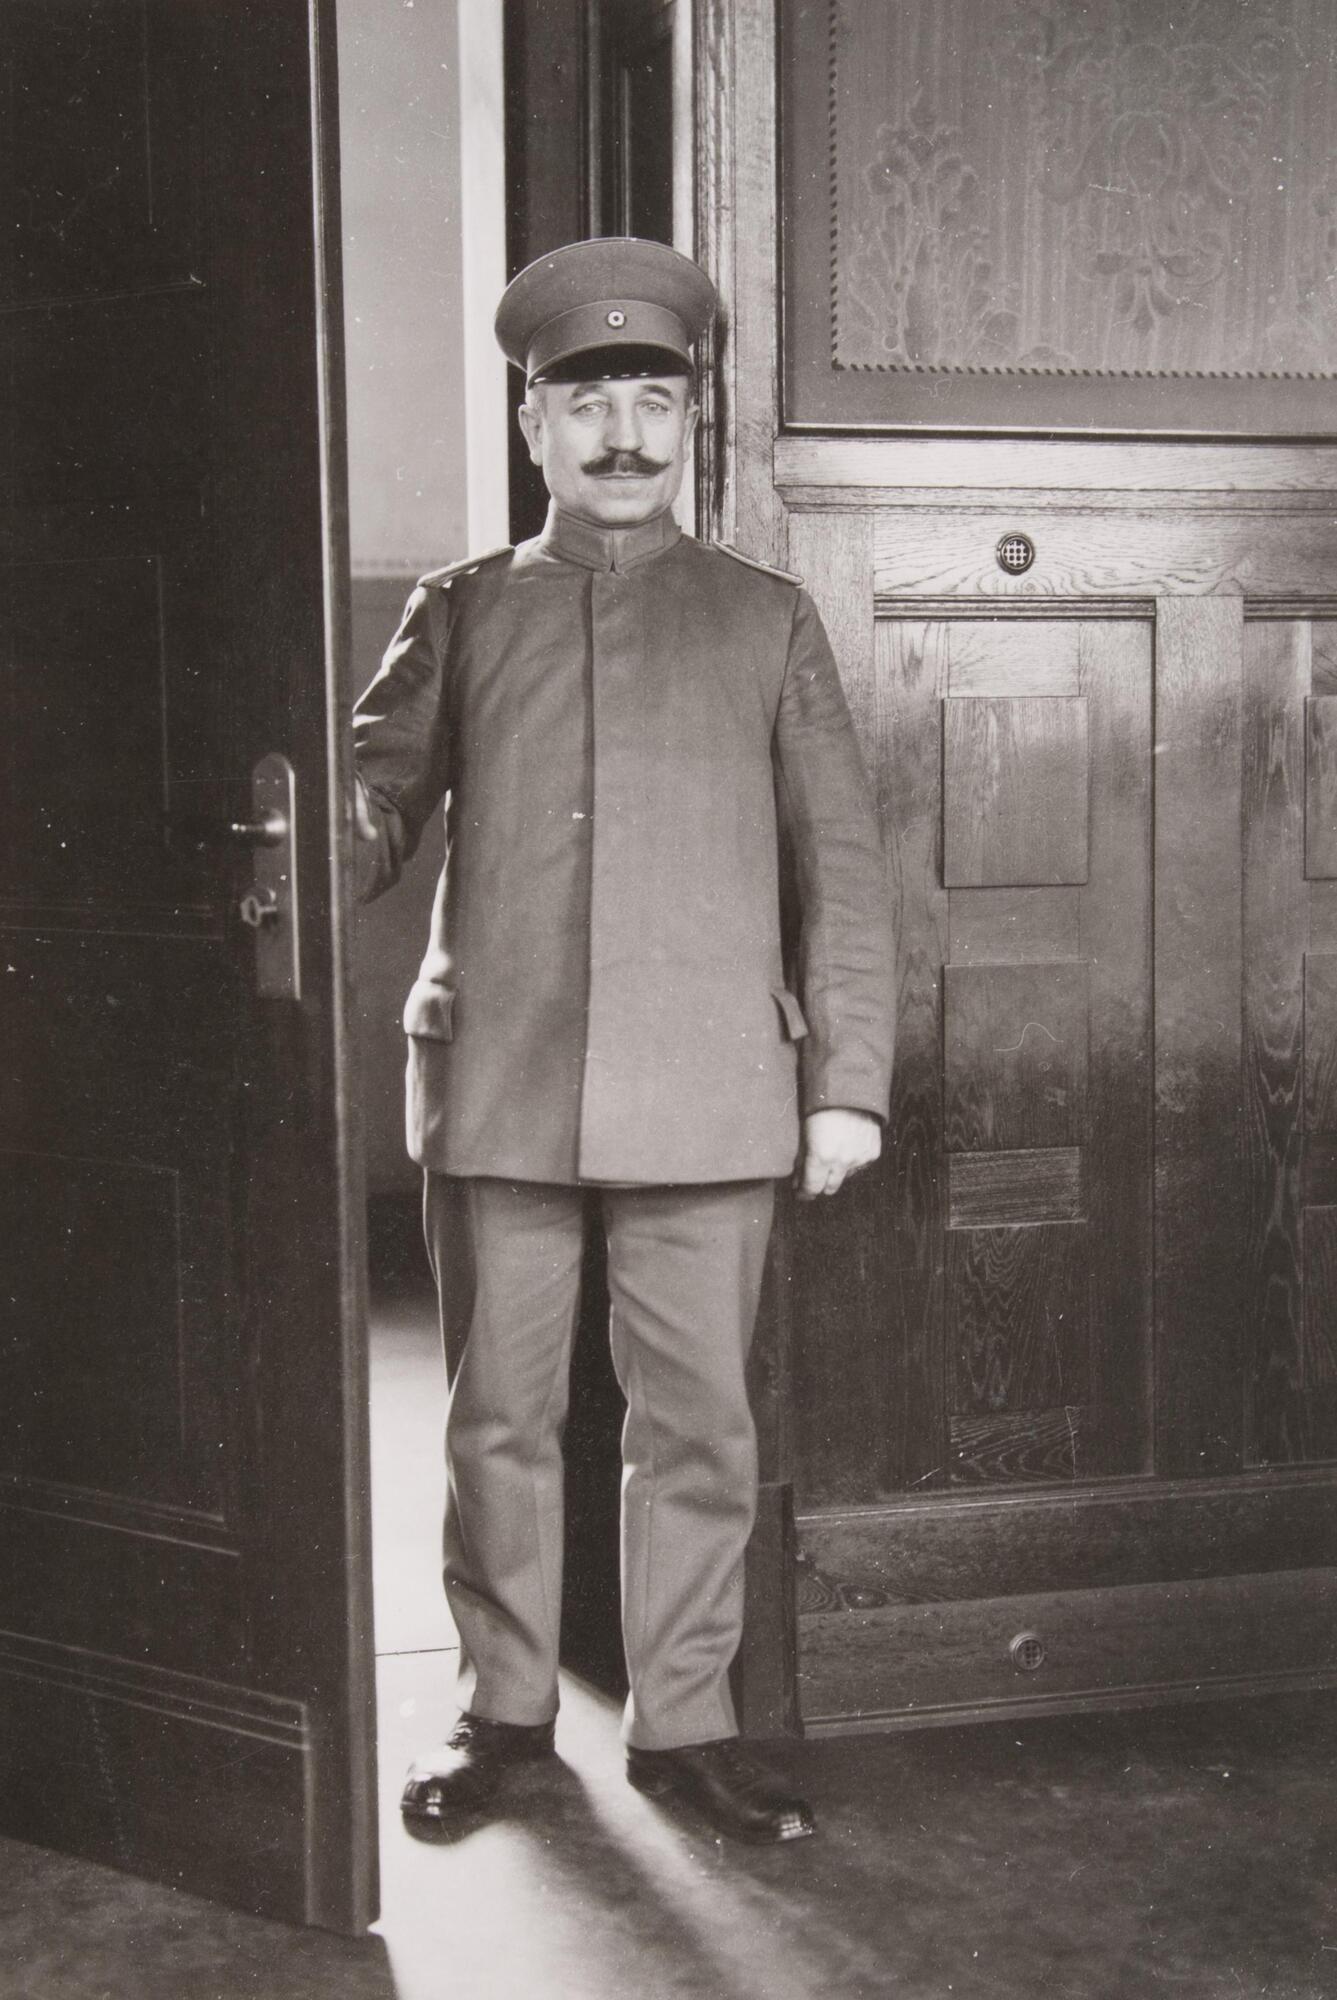 This photograph show a man standing inside of a court house. He is fully dressed in a uniform, standing in a doorway.